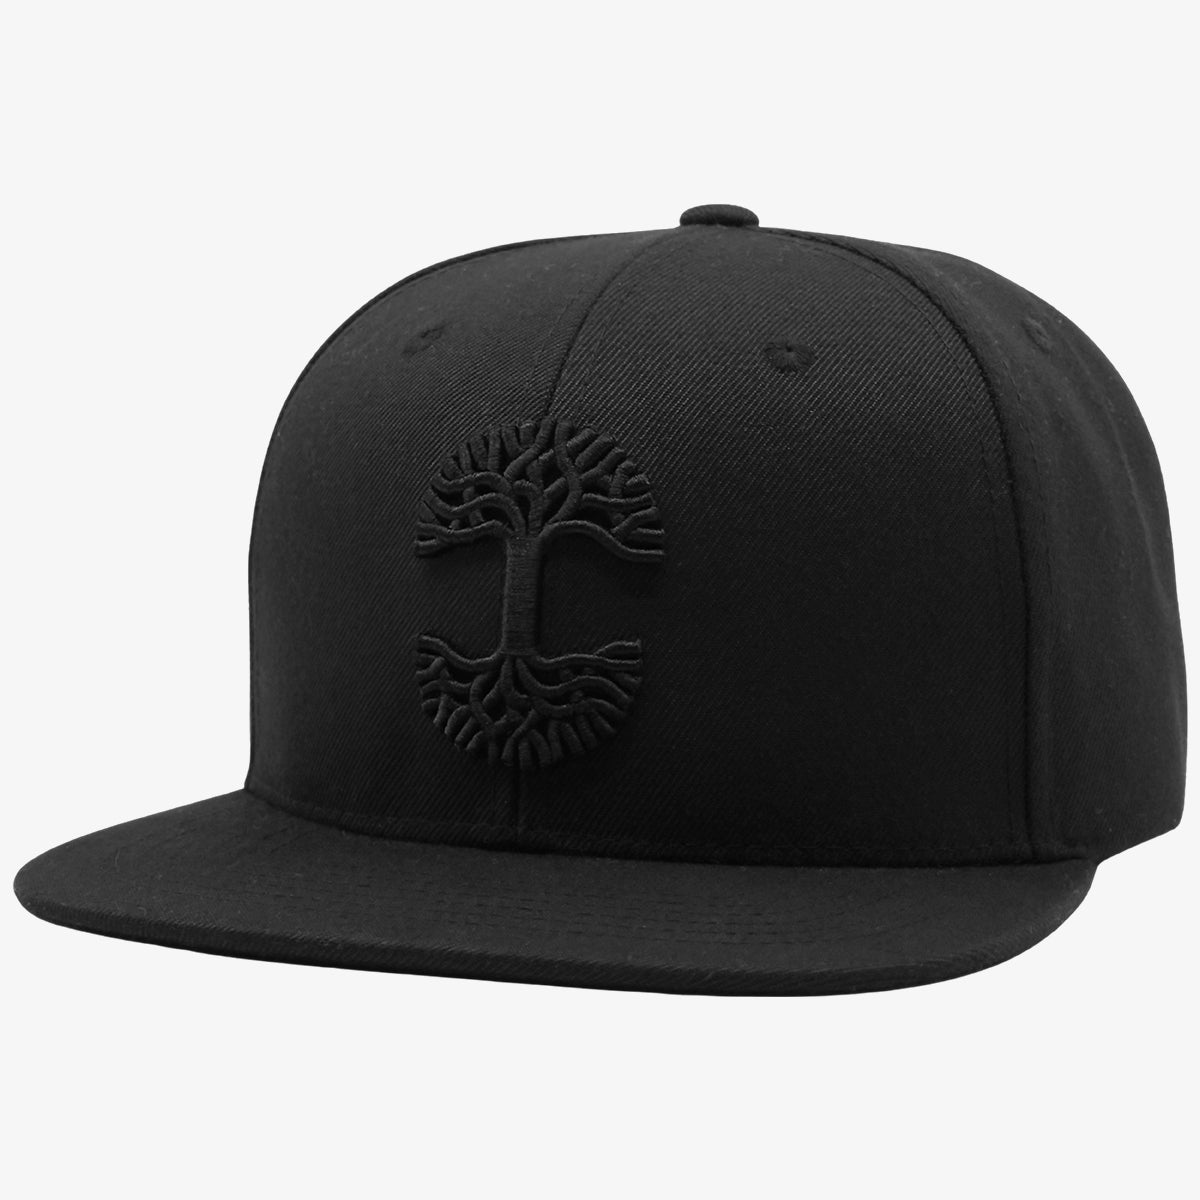 Black cap with black embroidered Oaklandish tree logo on the front.